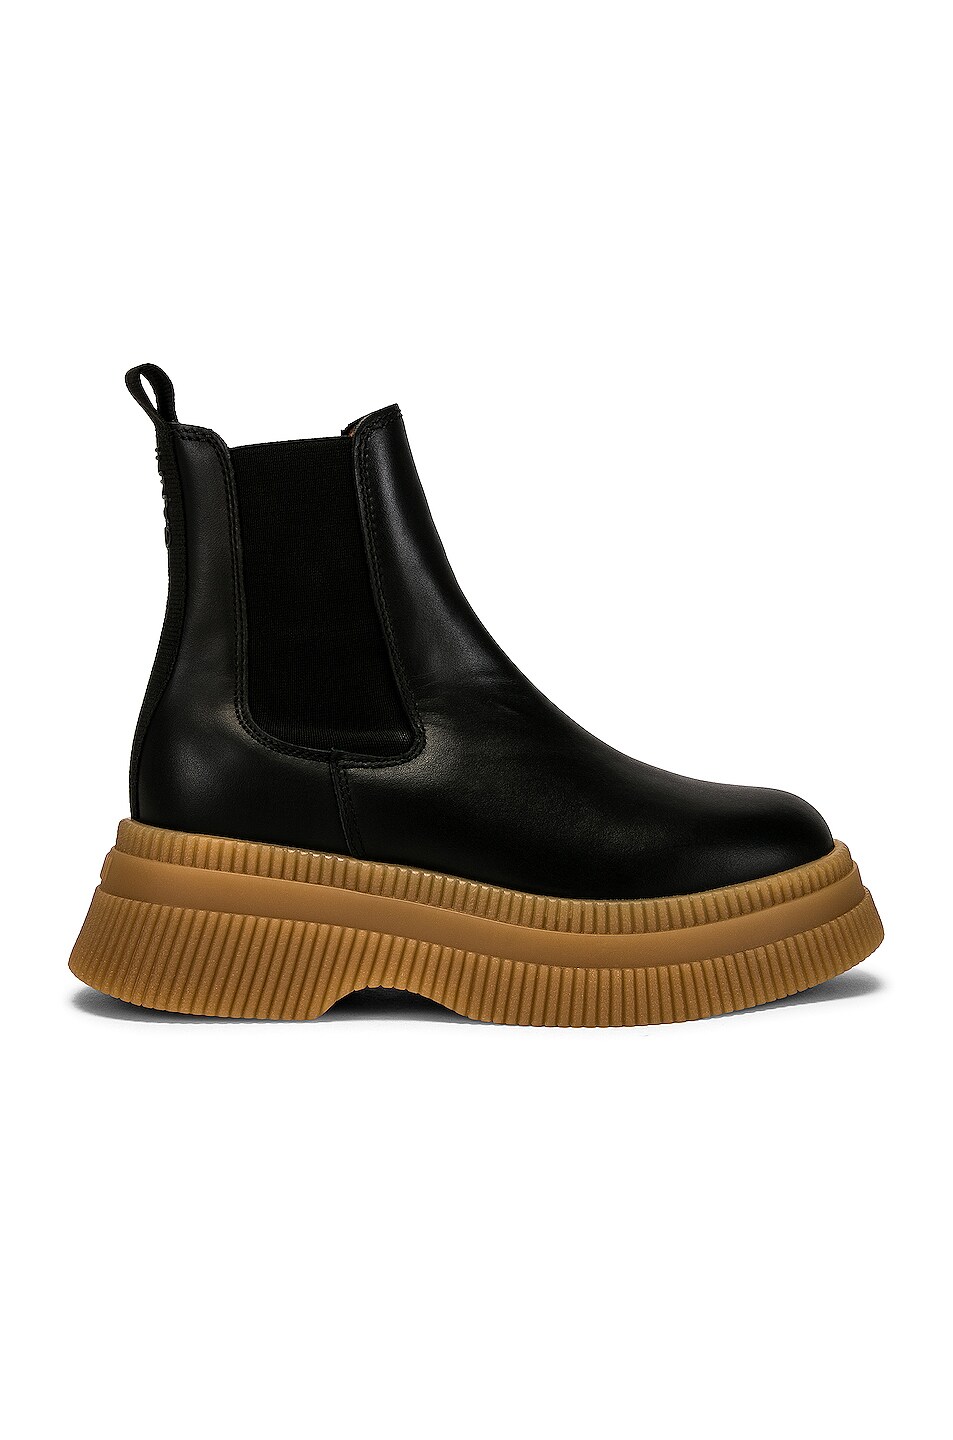 Image 1 of Ganni Creepers Boot in Black & Nature